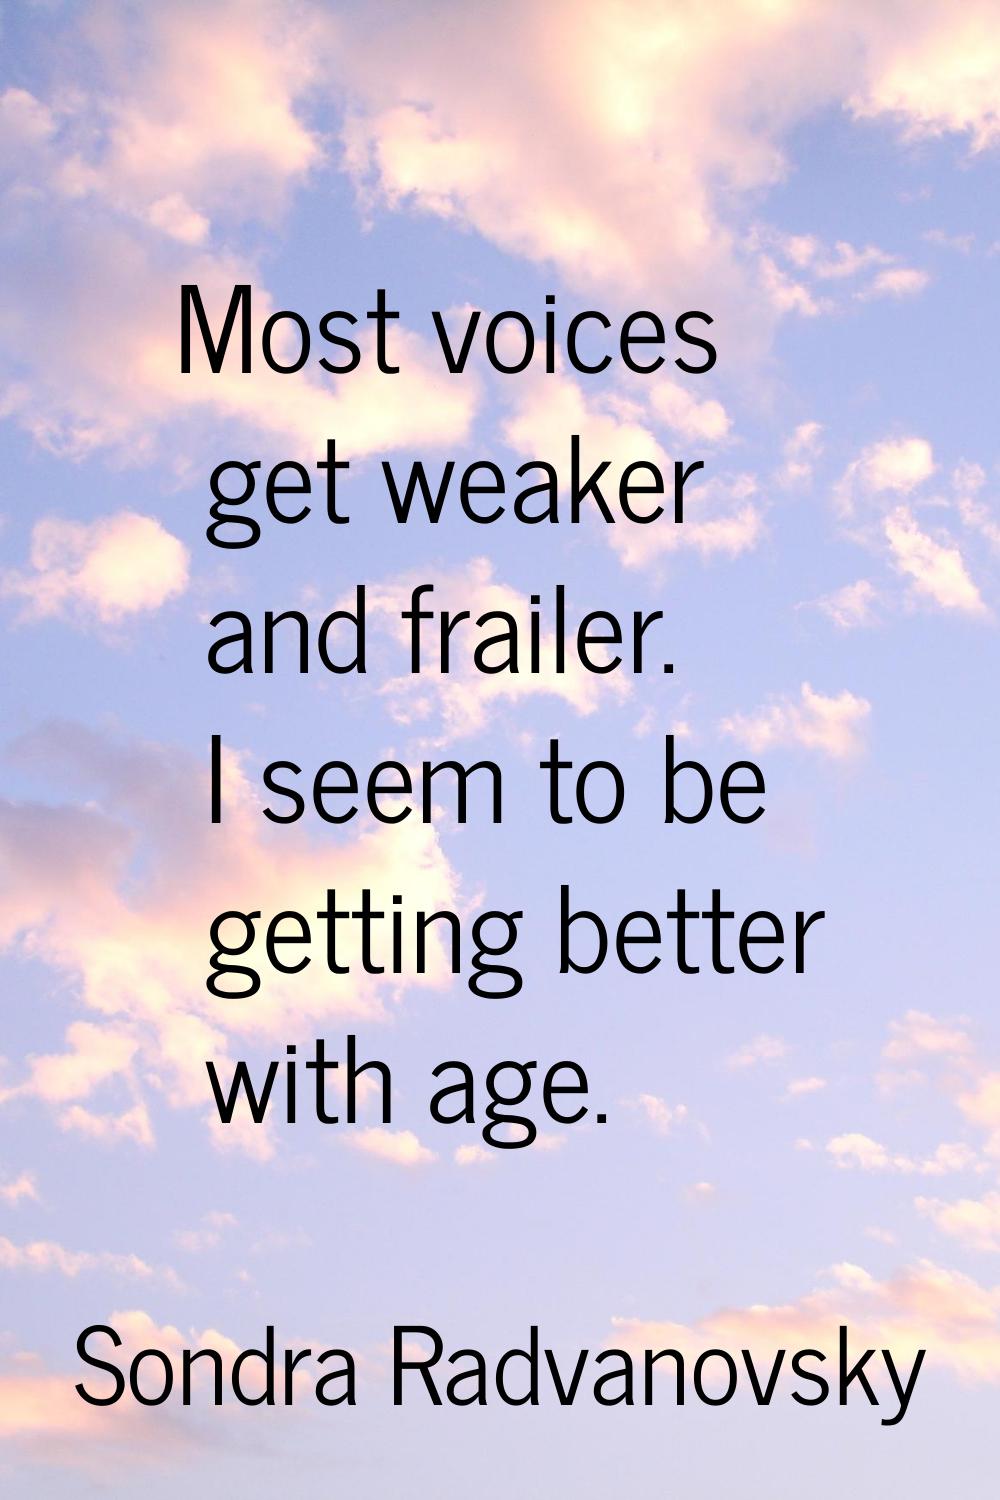 Most voices get weaker and frailer. I seem to be getting better with age.